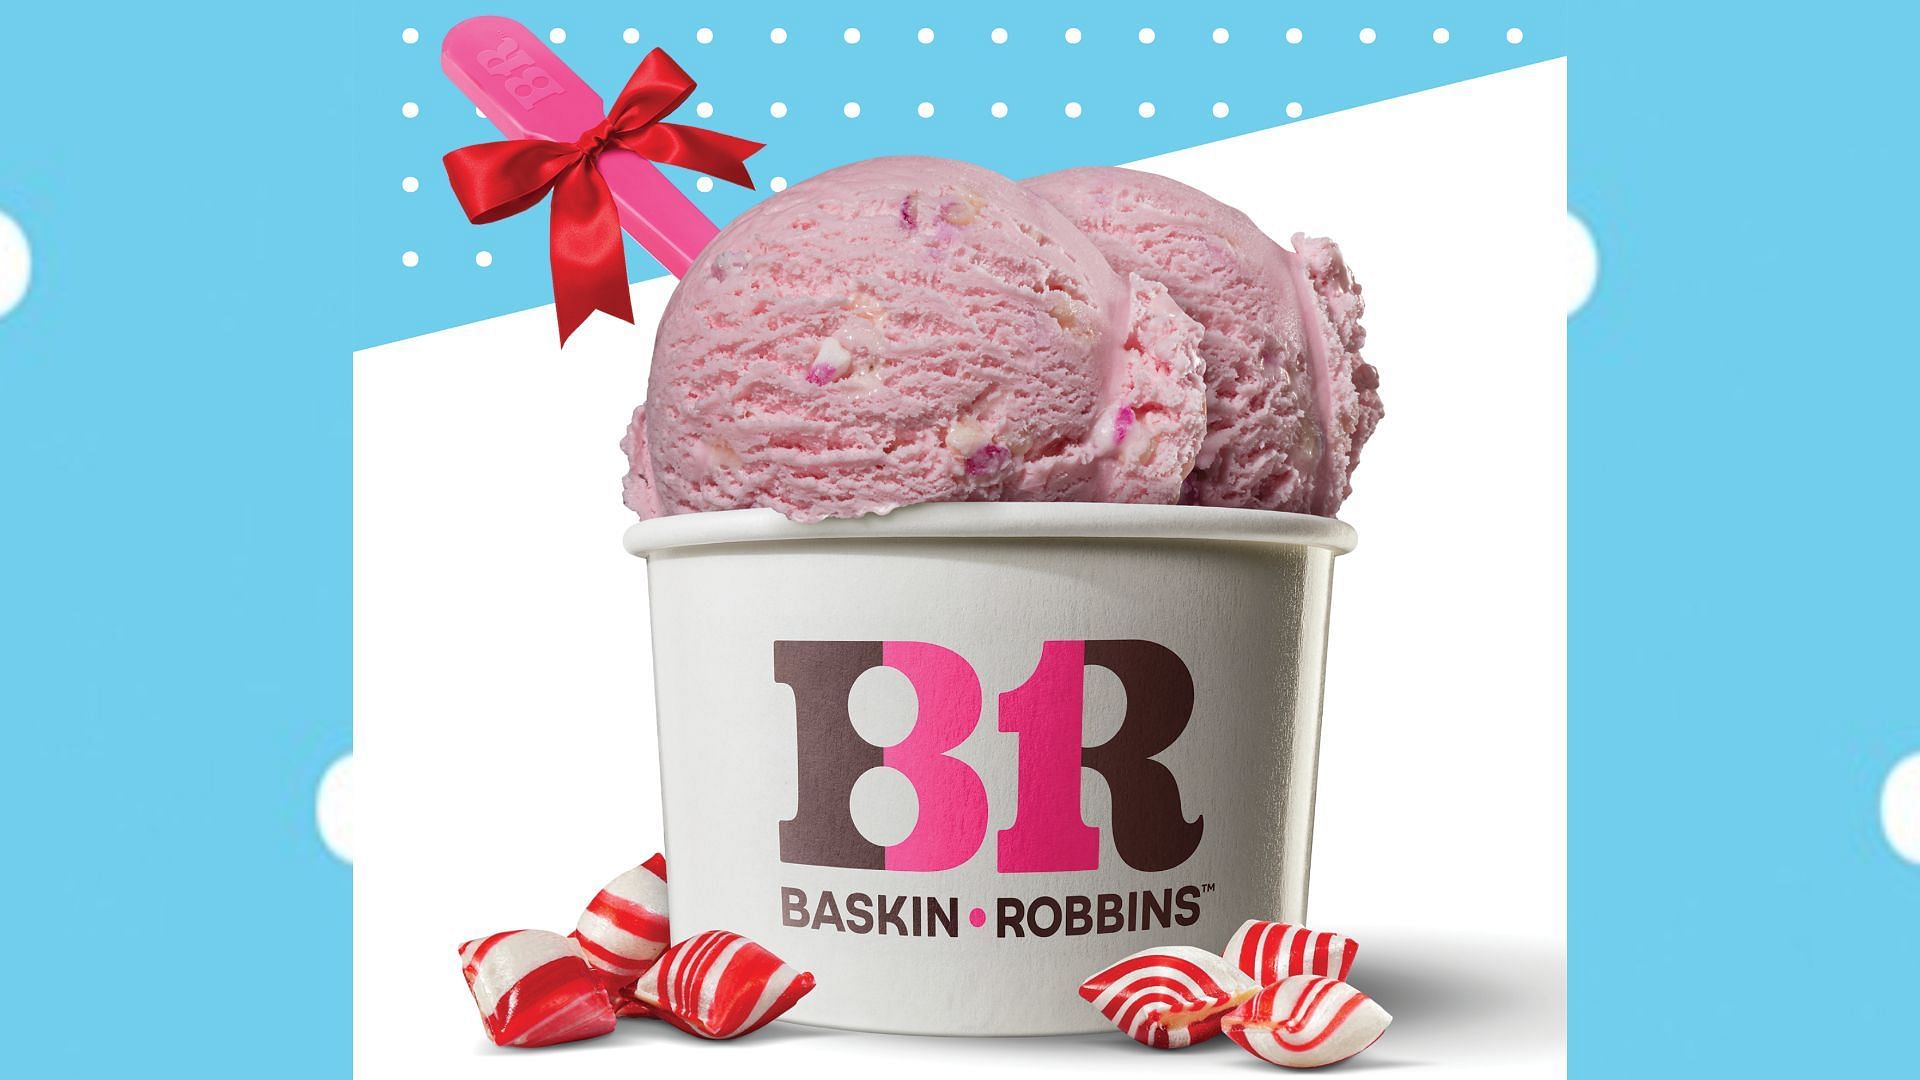 enjoy the flavor of the month through the Peppermint Ice Cream (Image via Baskin-Robbins Press Release)